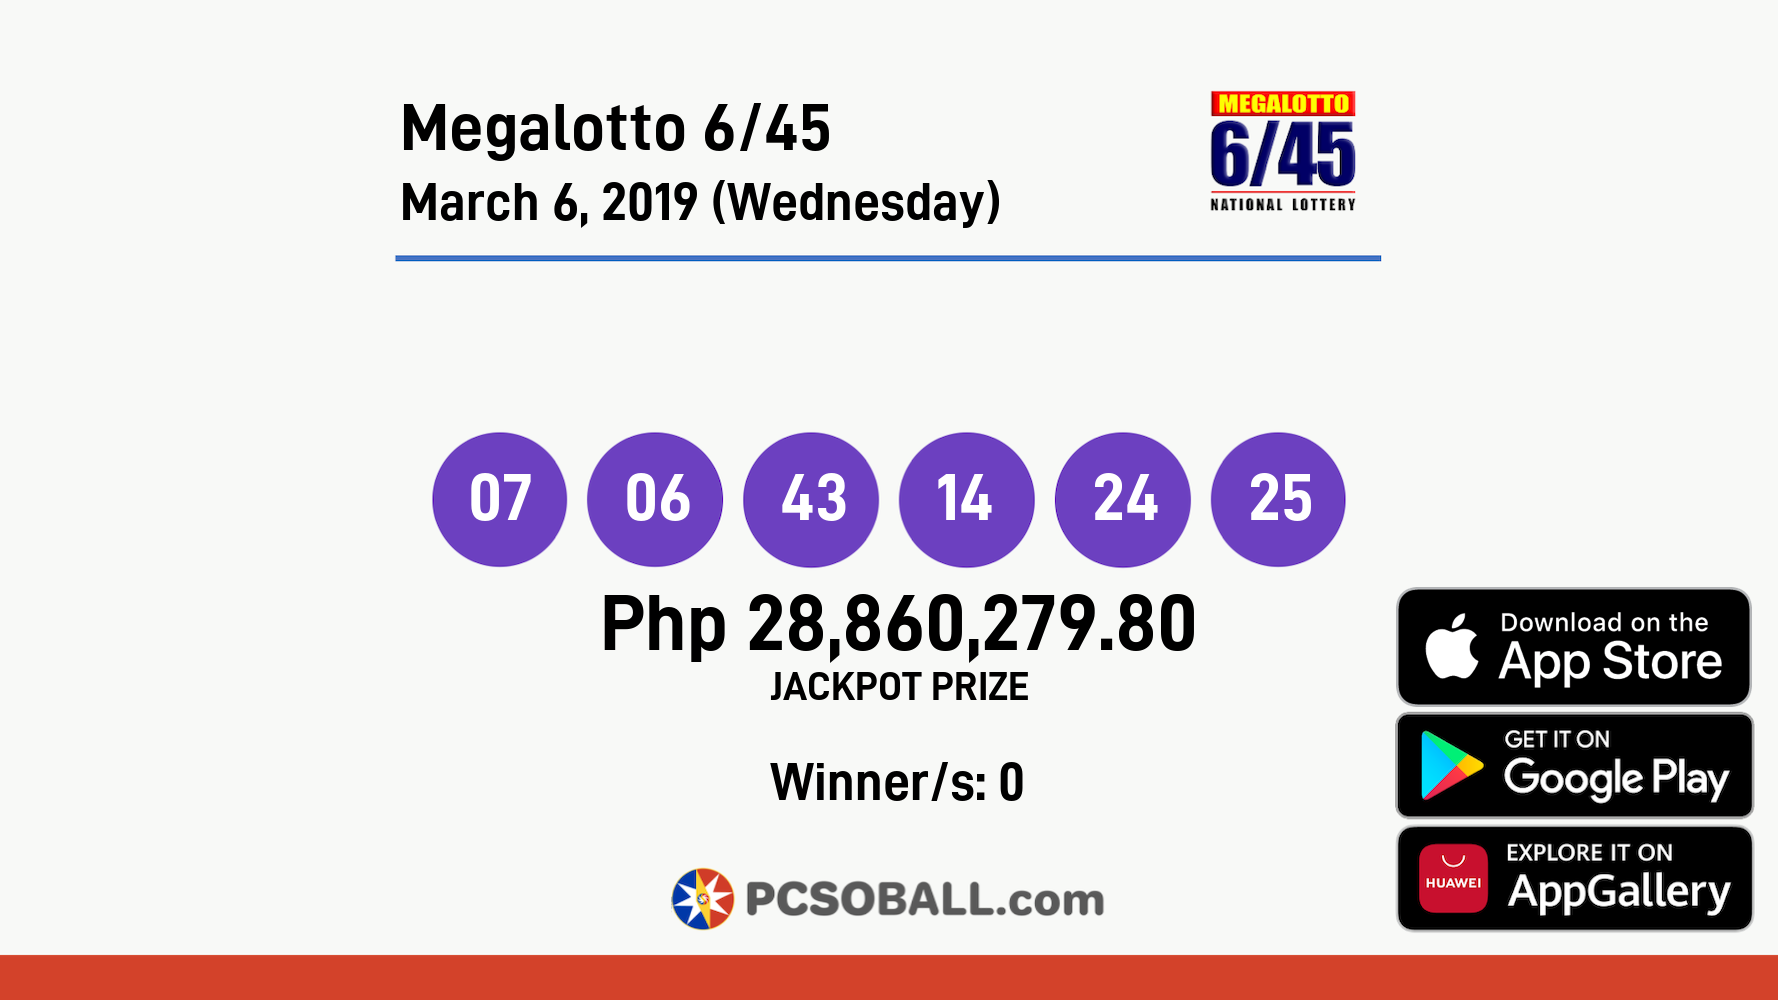 Megalotto 6/45 March 6, 2019 (Wednesday) Result